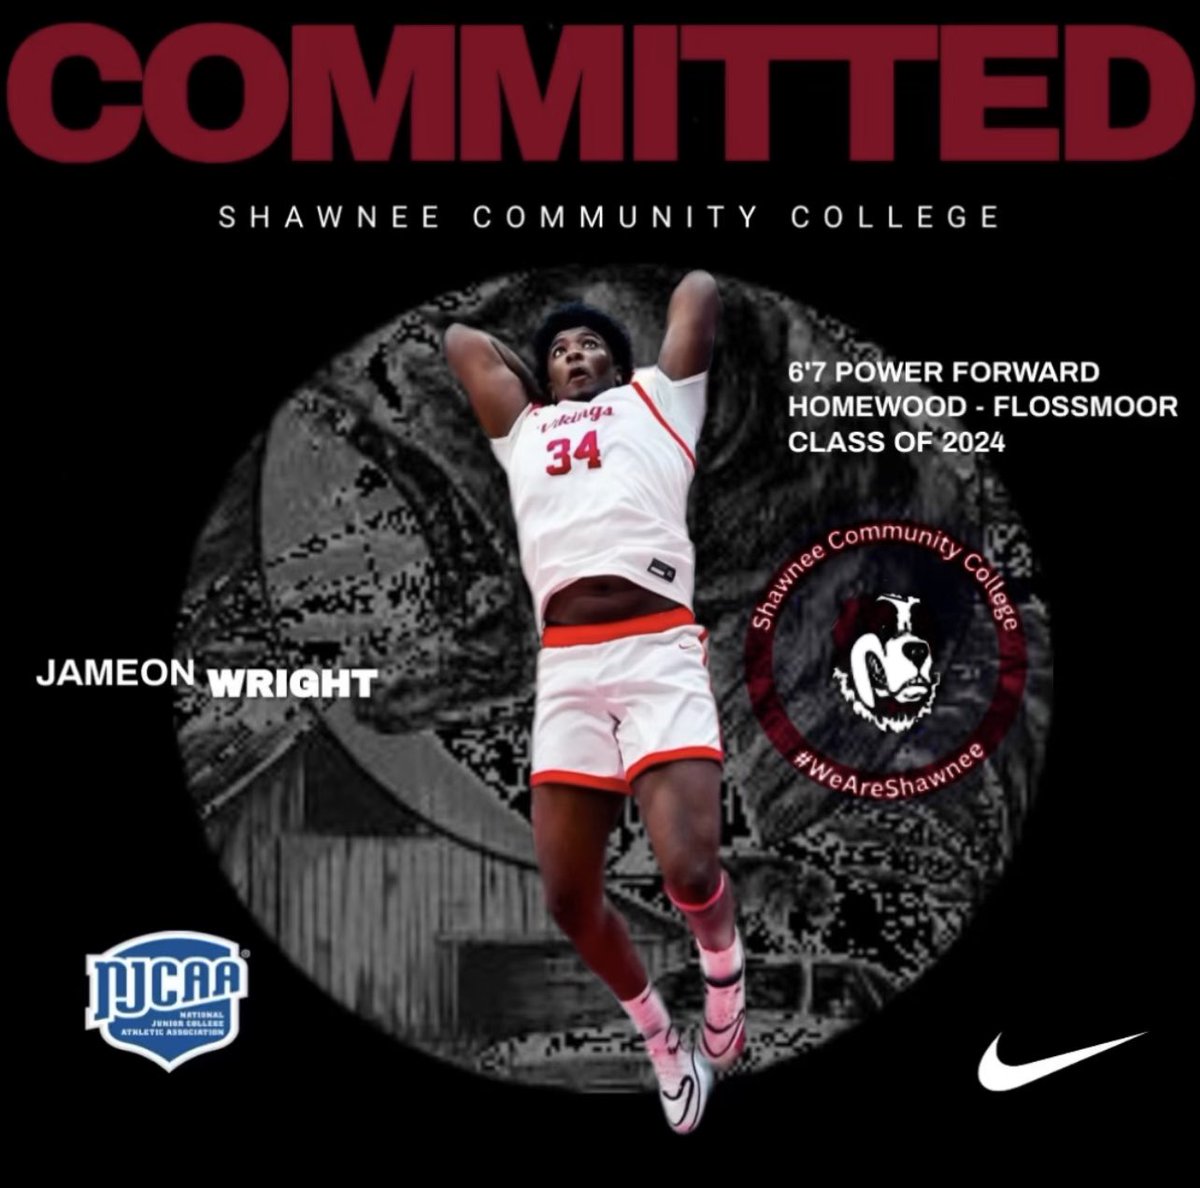 I will first of all like to thank god, my family, the whole Homewood flossmoor basketball staff, Illinois bobcats staff, and friends that was there throughout the whole journey. I will like to announce that I will be committing to Shawnee community college, a division 1 juco.